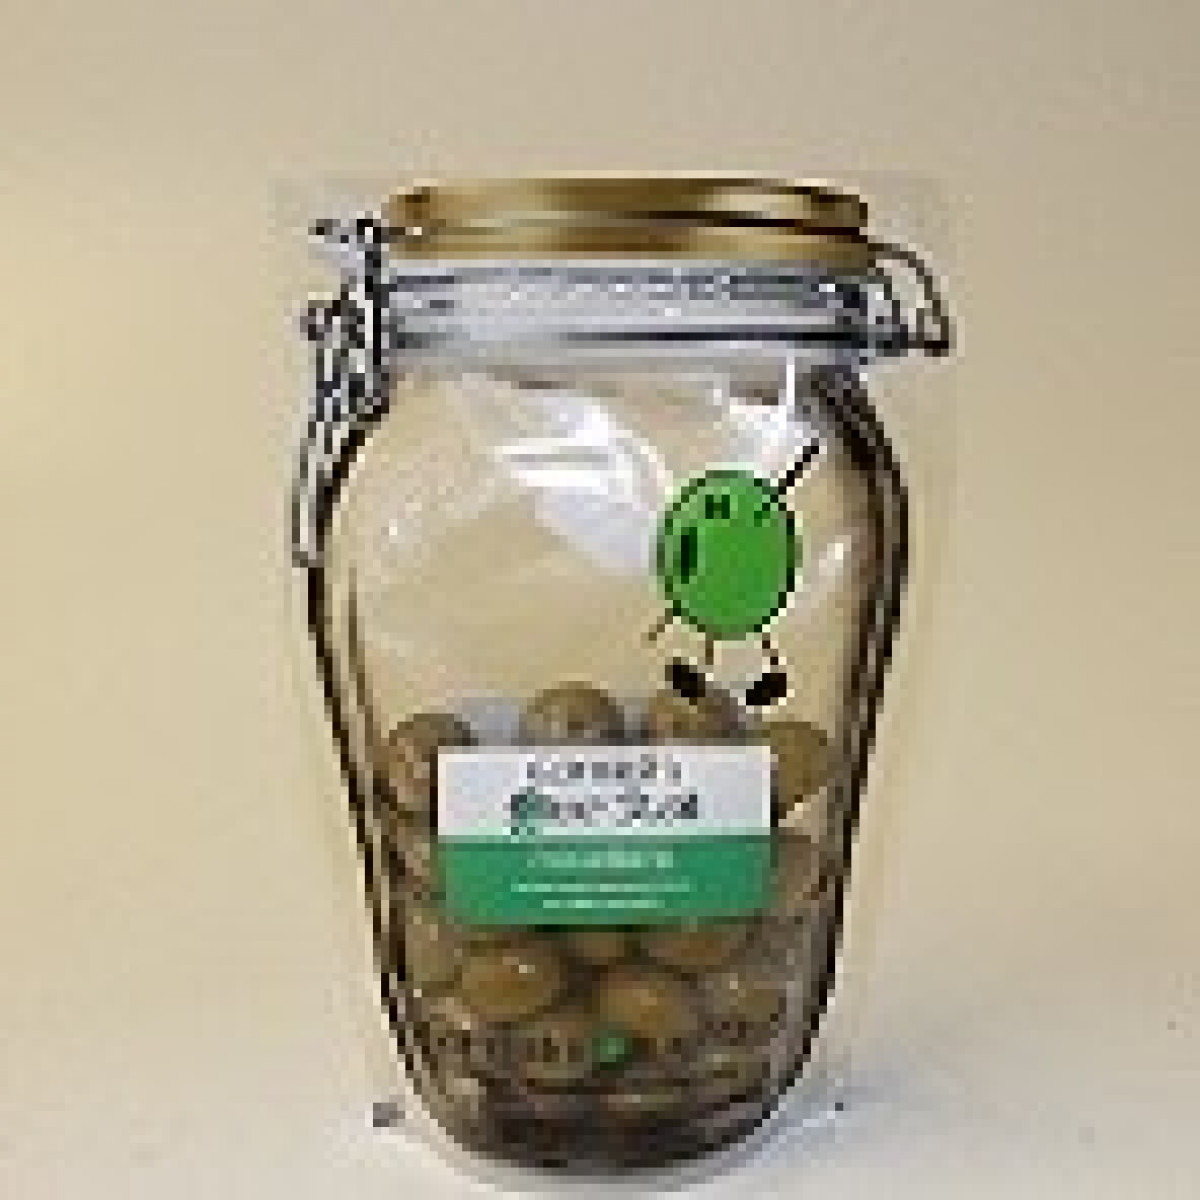 Product picture for Basil pesto olives